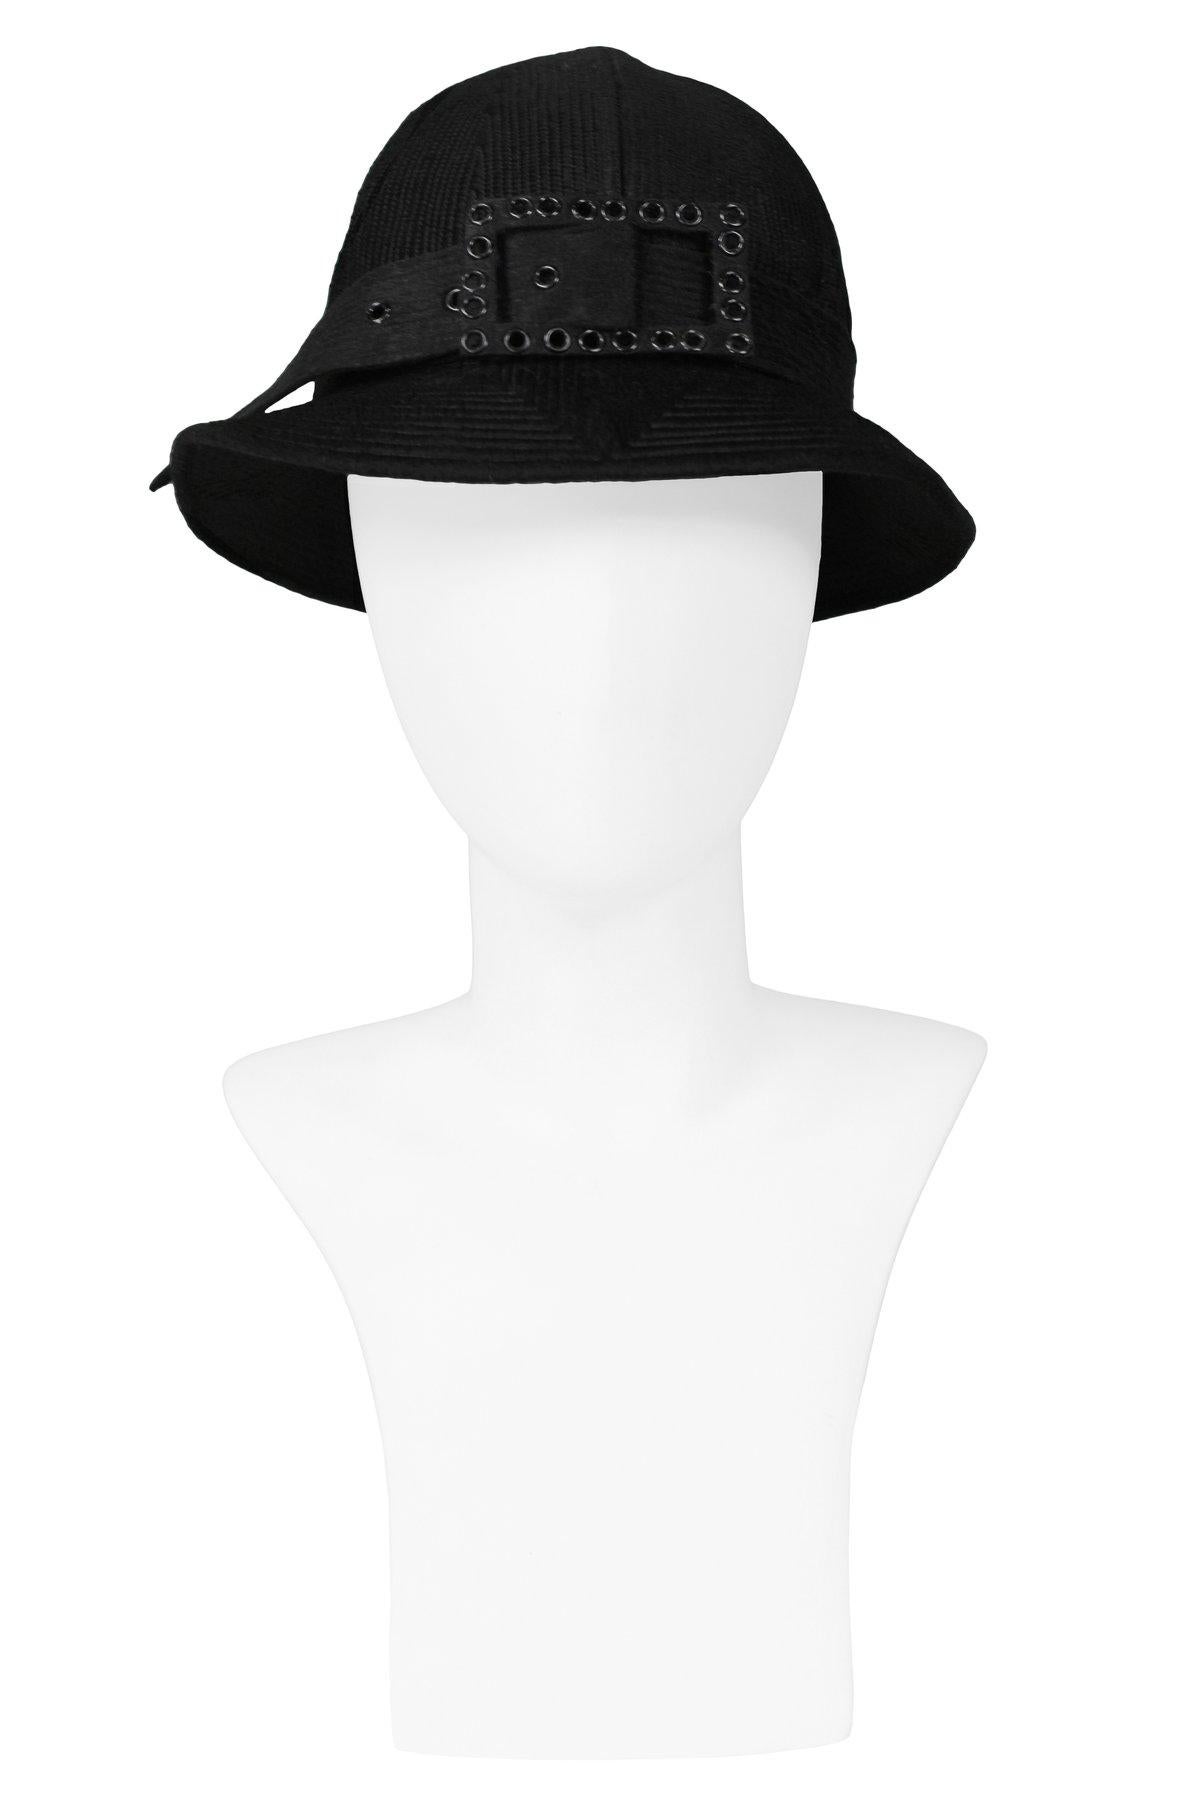 Resurrection is pleased to offer a vintage Galanos black wool fancy hat with detailed stitching and a large buckle at the front. 

Galanos
James Galanos
One Size
Wool
Excellent Vintage Condition 
Authenticity Guarantee